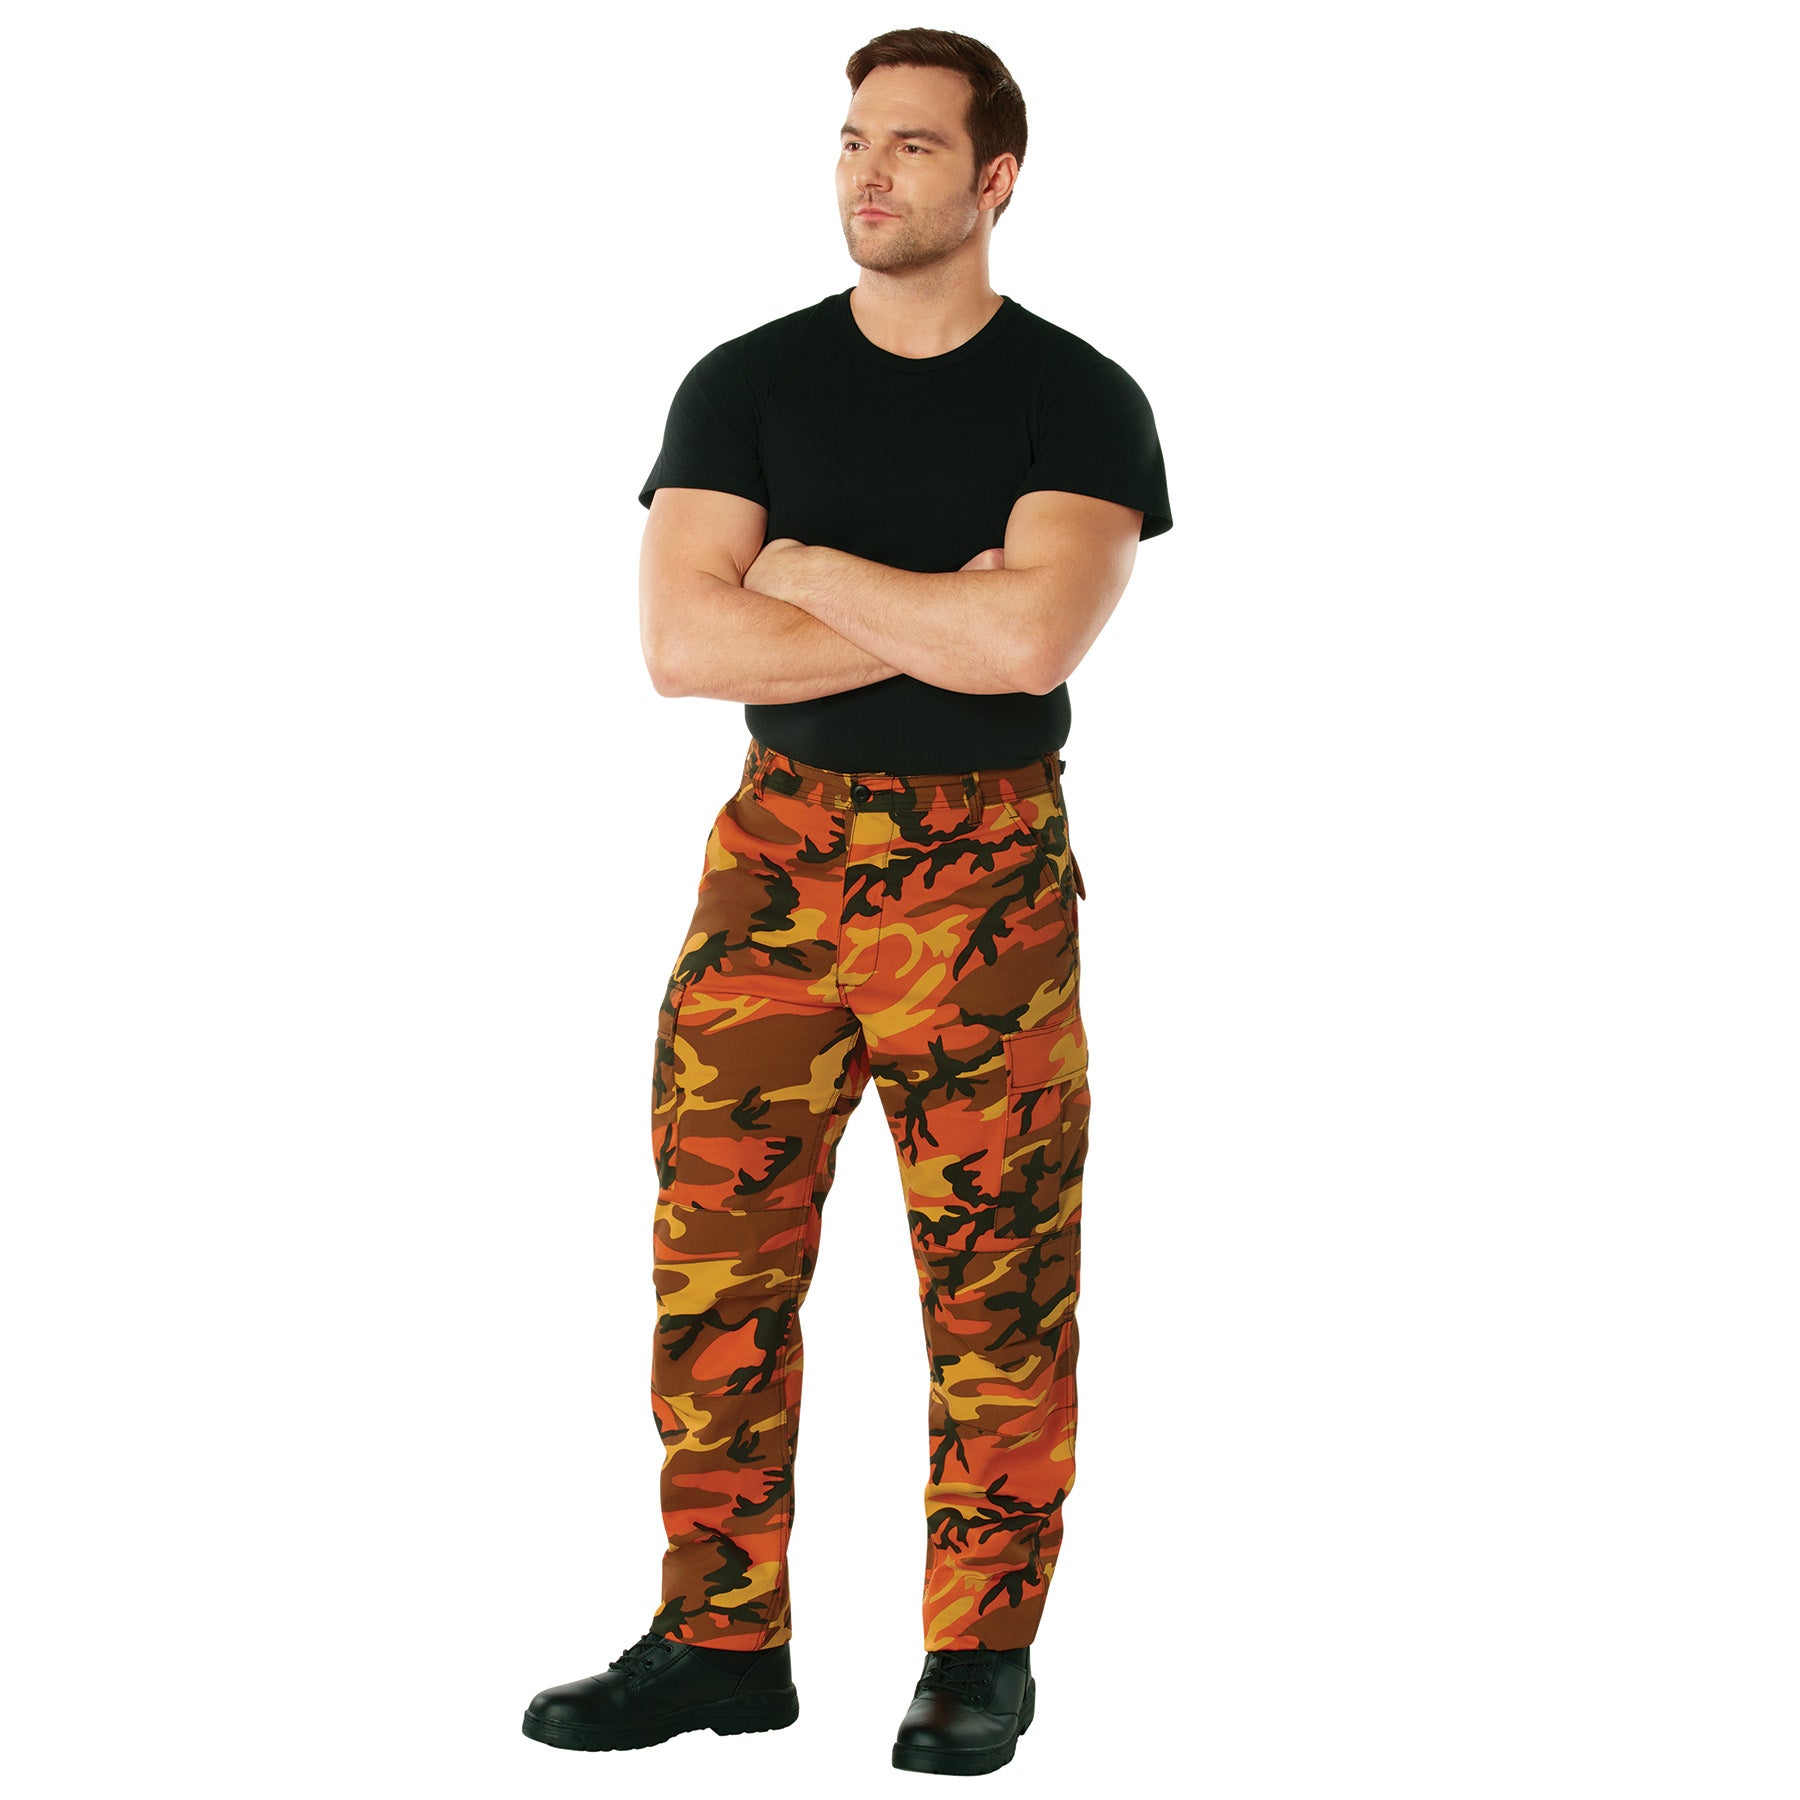 Orange Camouflage Pants Men and Women Sweatpants Purple Pink Gray Camo  Pants Trousers Cargo Pant Streetwear Hip Hop Harem Jogger  Price history   Review  AliExpress Seller  Trend tribe Store  Alitoolsio